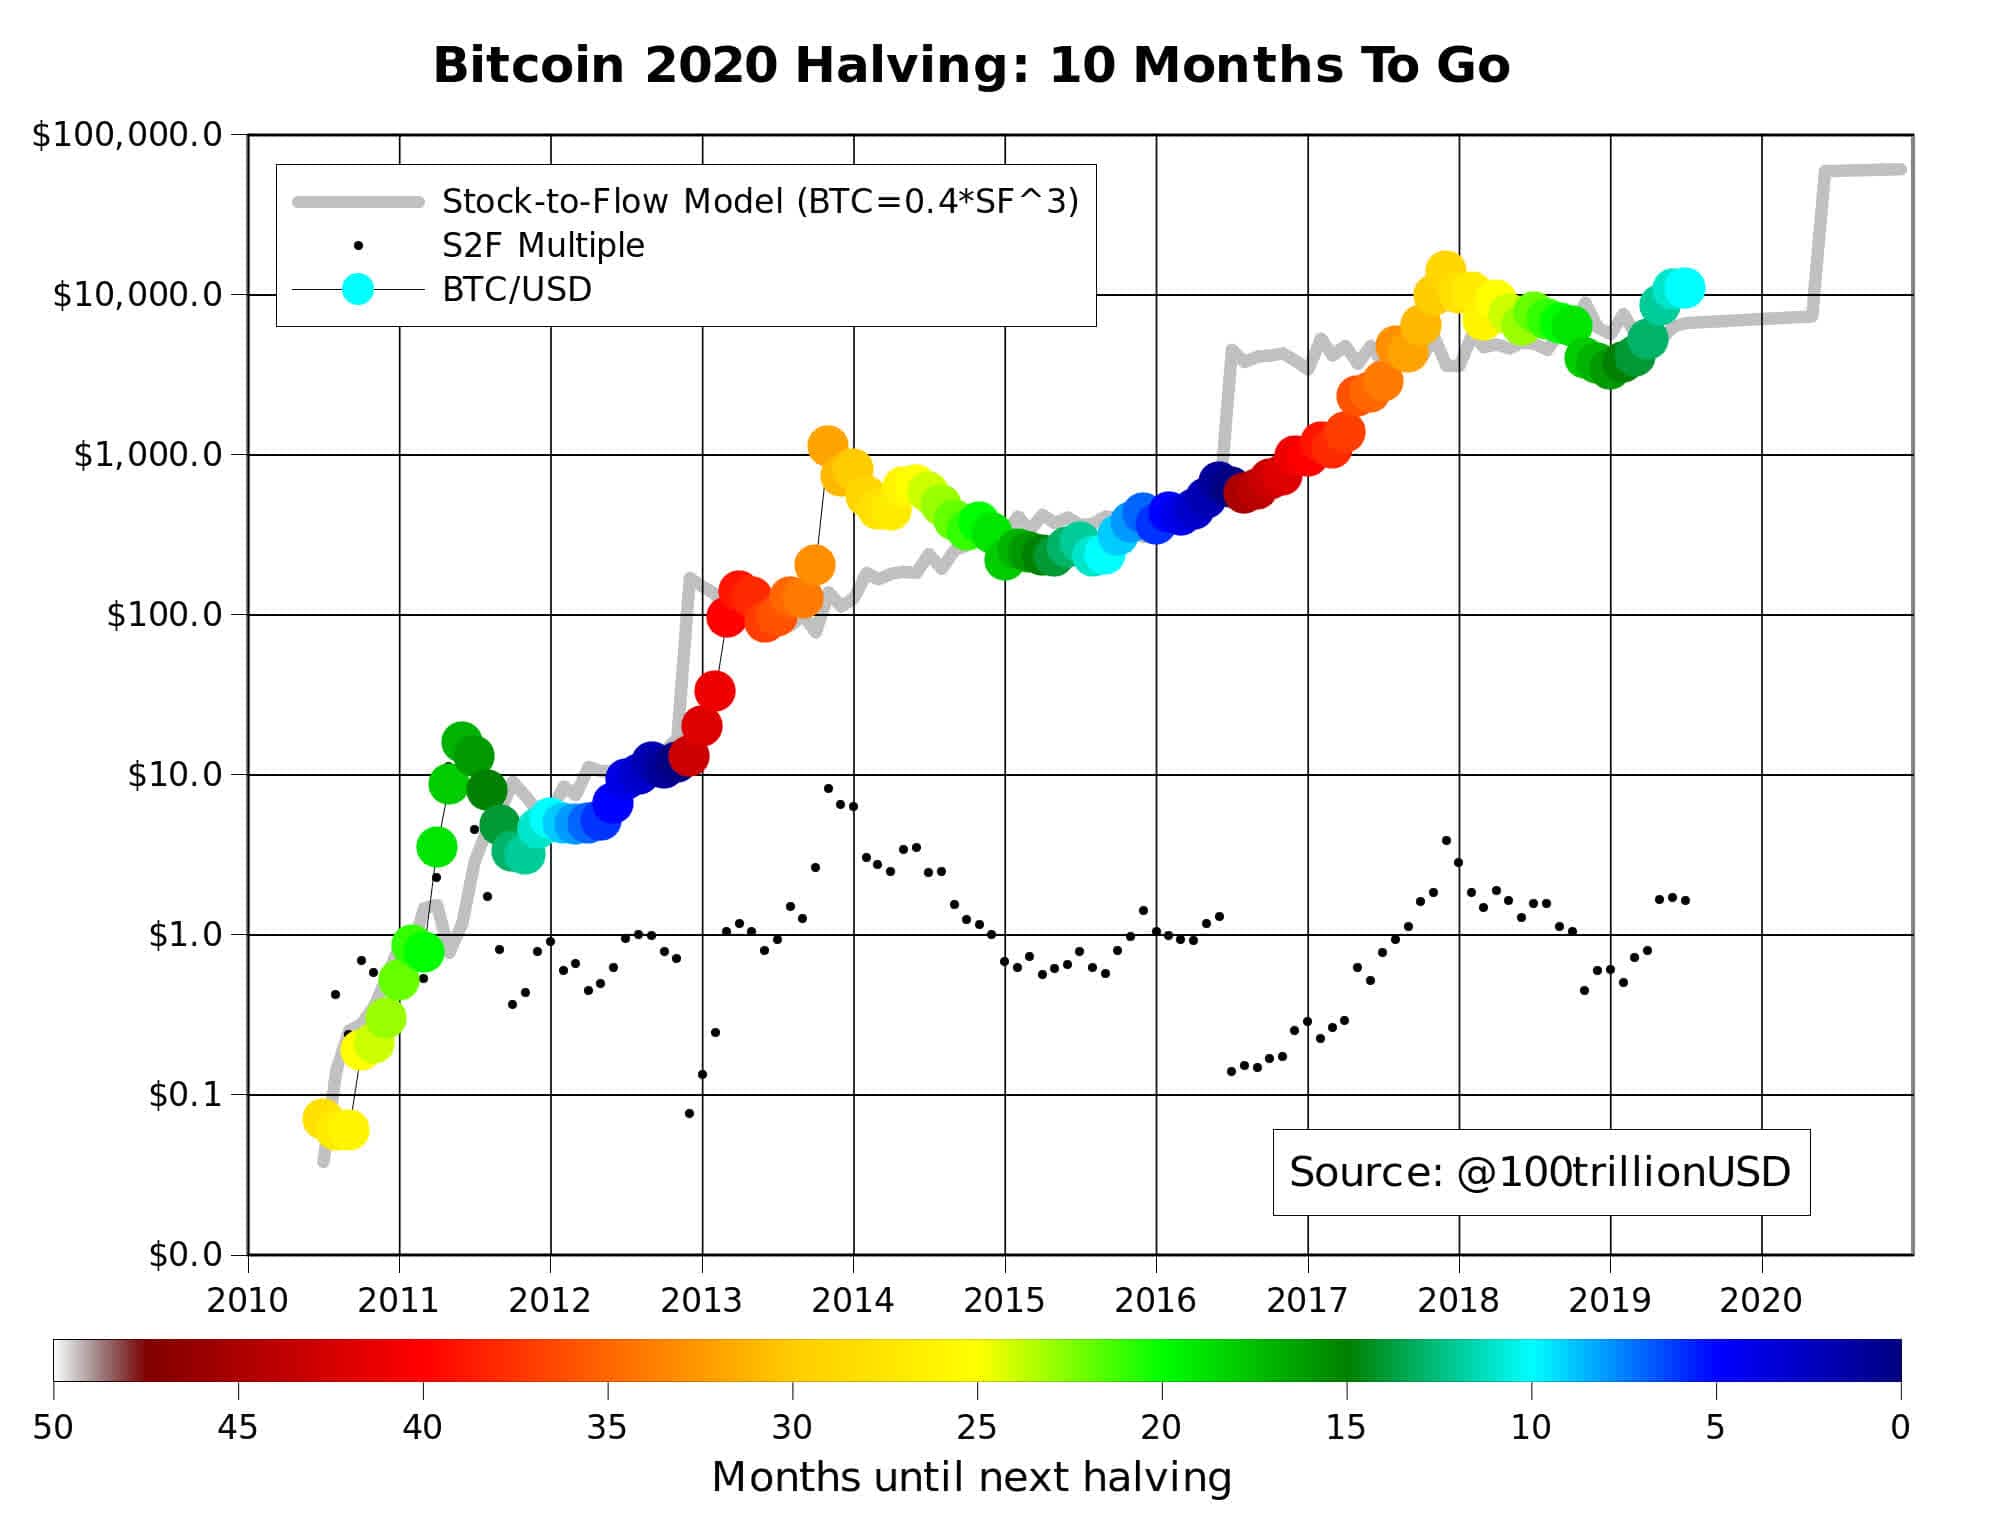 Bitcoin halving over time